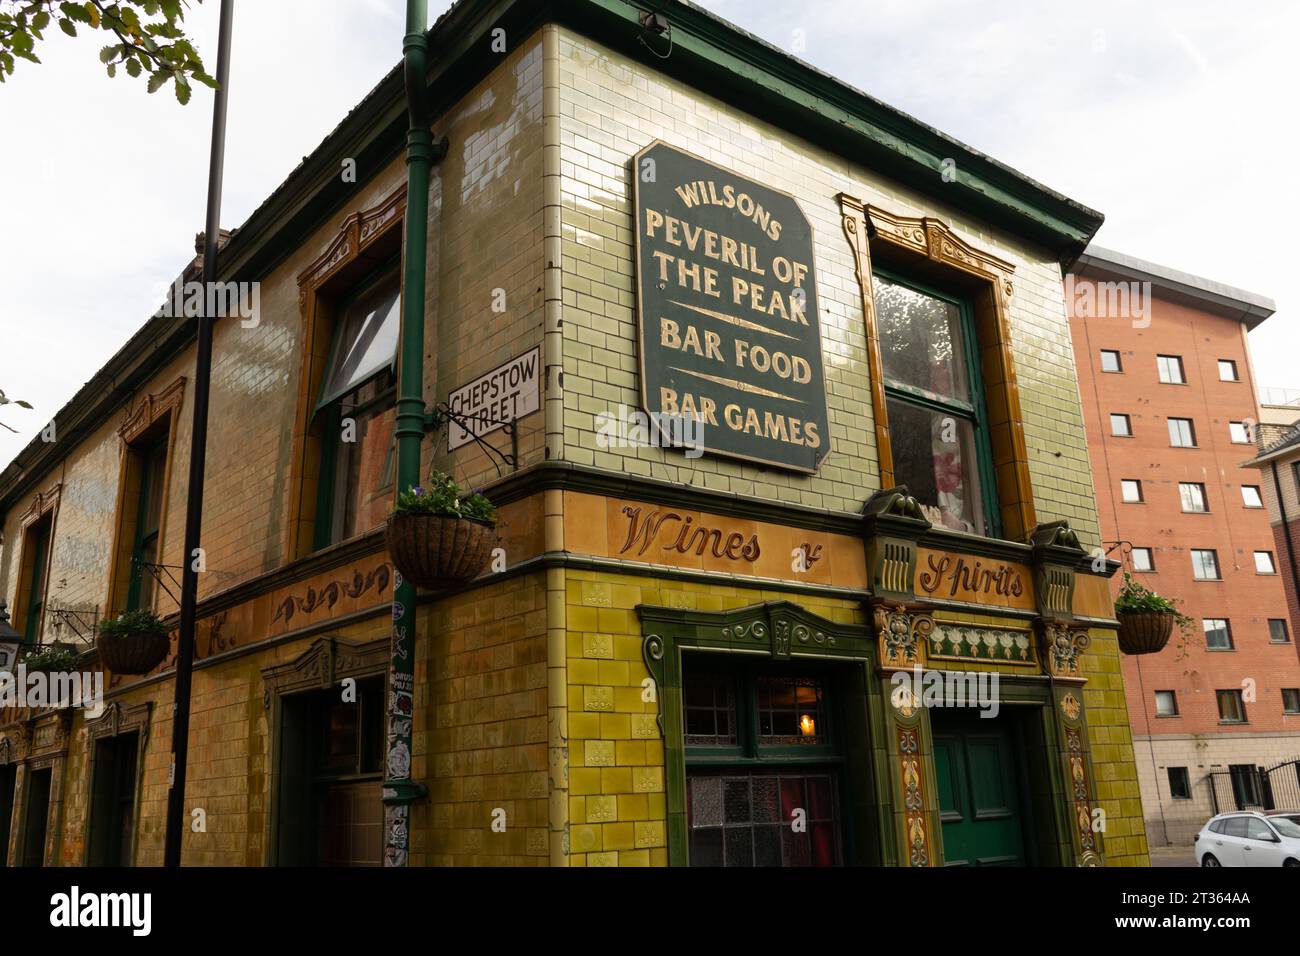 Peveril of the Peak public house. Traditional pub with tiled exterior. Chepstow Street. Sign text Bar Food Bar Games. Manchester UK Stock Photo